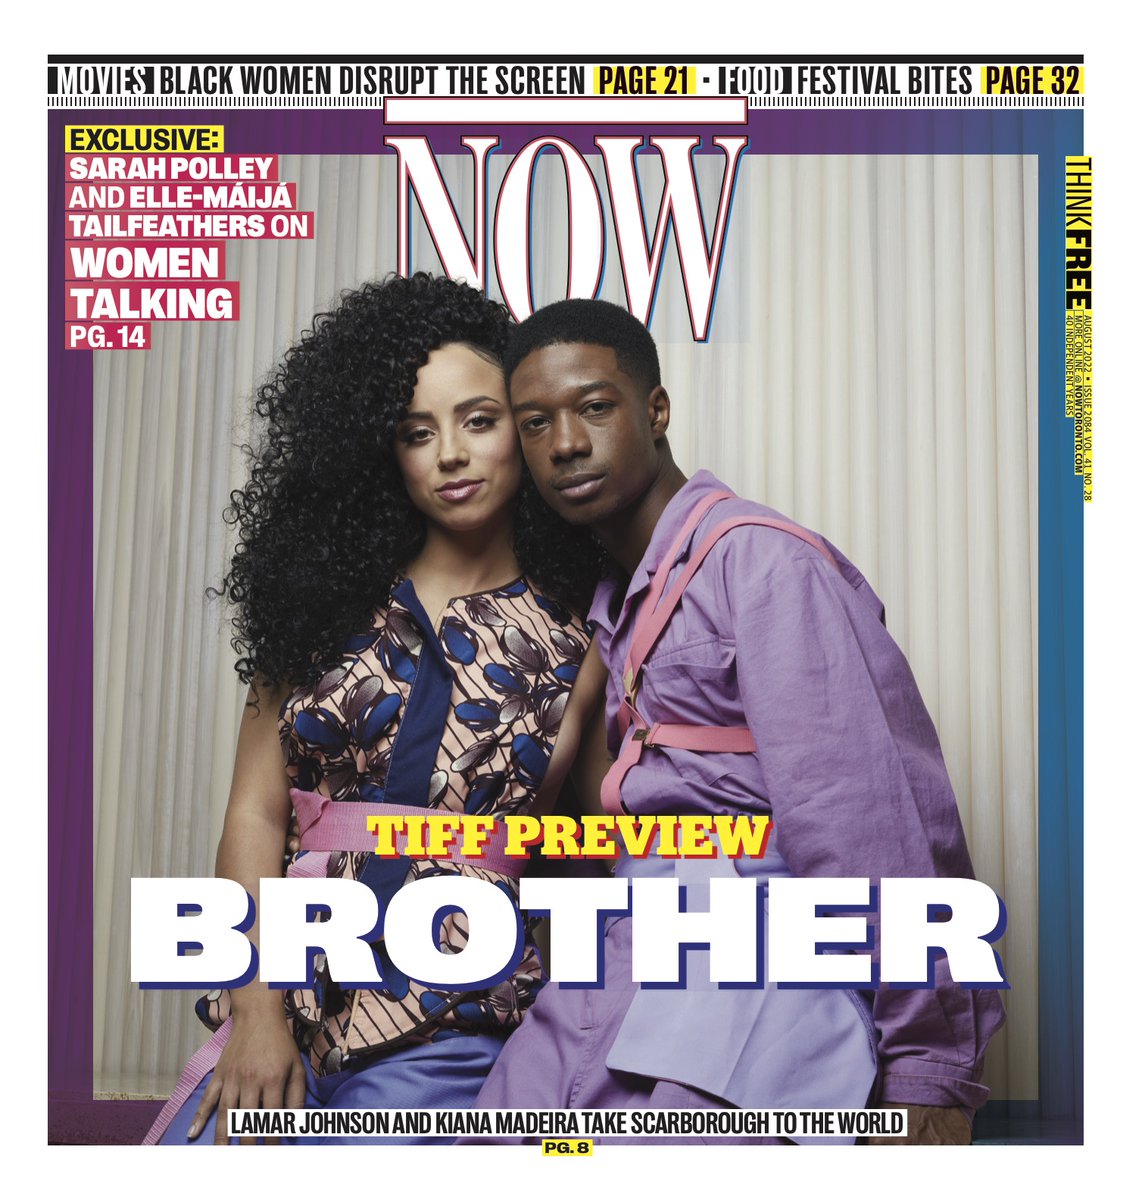 This month's cover: @LamarJohnsonn & Kiana Madeira front our 🔥 #TIFF22 issue, taking us on a tour through the world of Brother. Read our report from the set. ow.ly/PLxY50Kluqn Plus: A print only exclusive with @realsarahpolley & Elle-Máijá Tailfeathers on Women Talking.